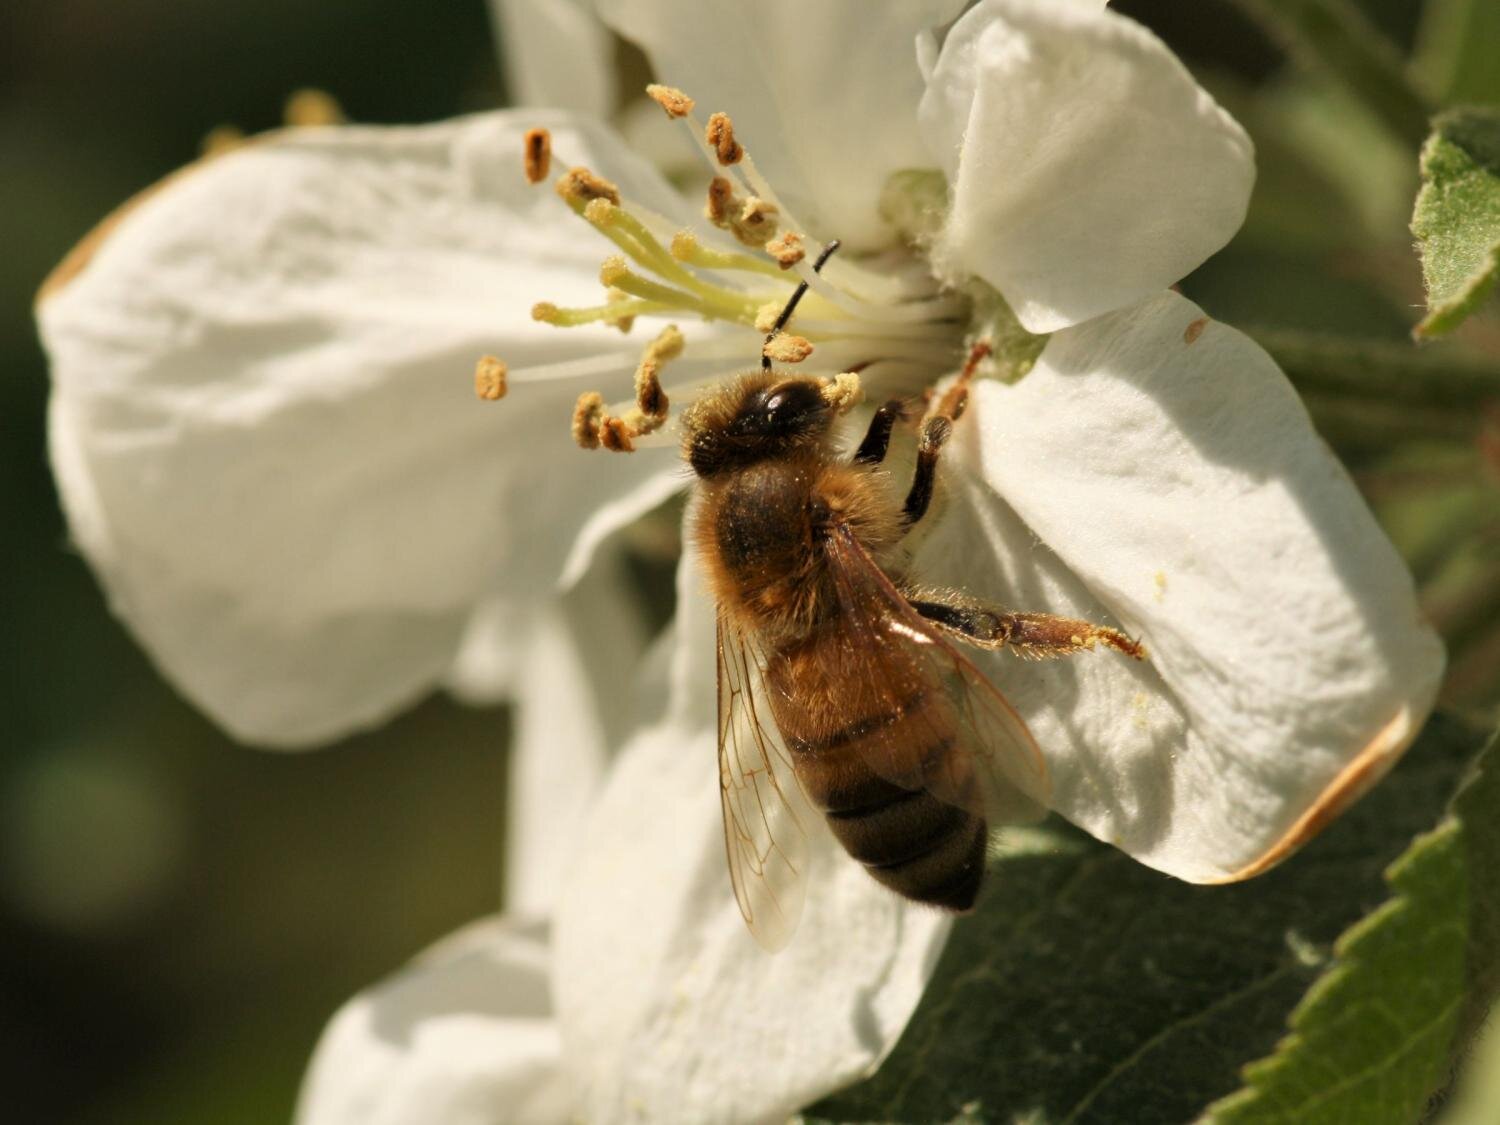 Bees May Aid In Pollinator Conservation